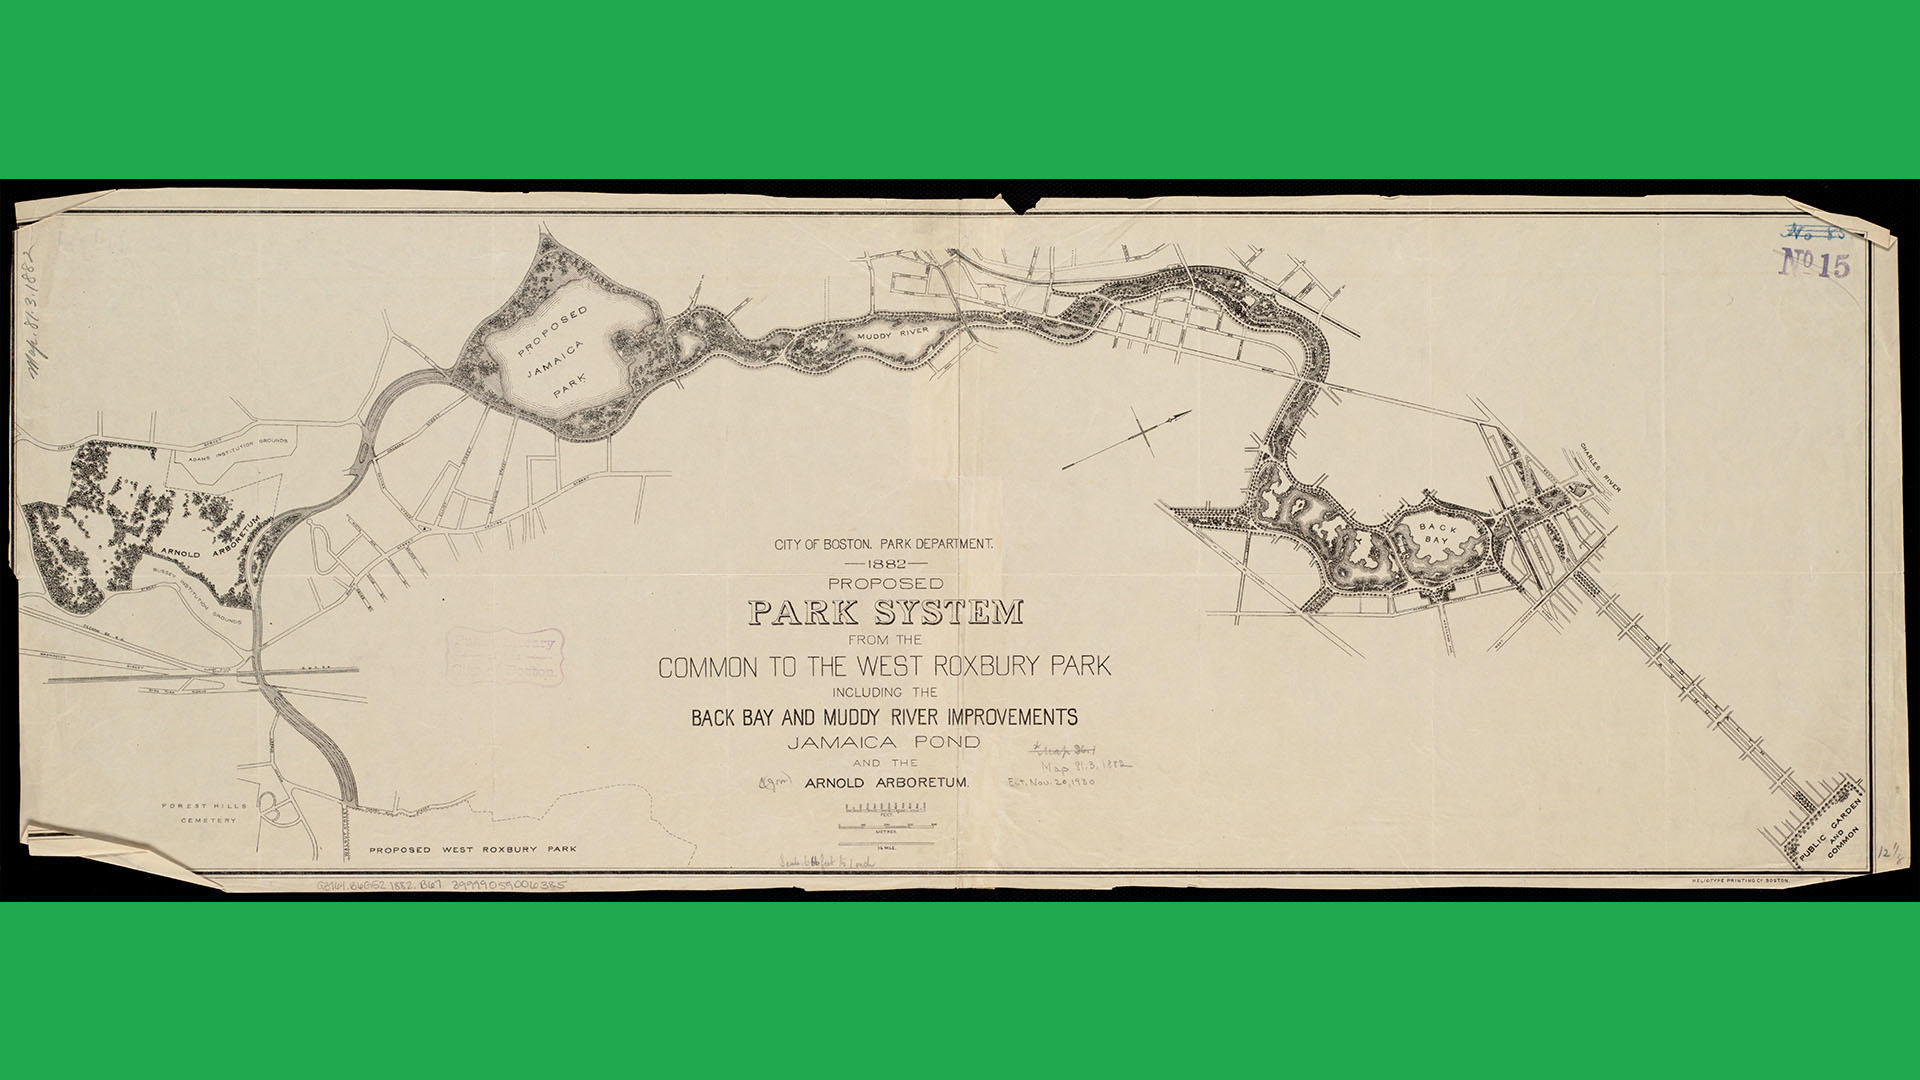 Proposed park system from the Common to the West Roxbury Park, 1882